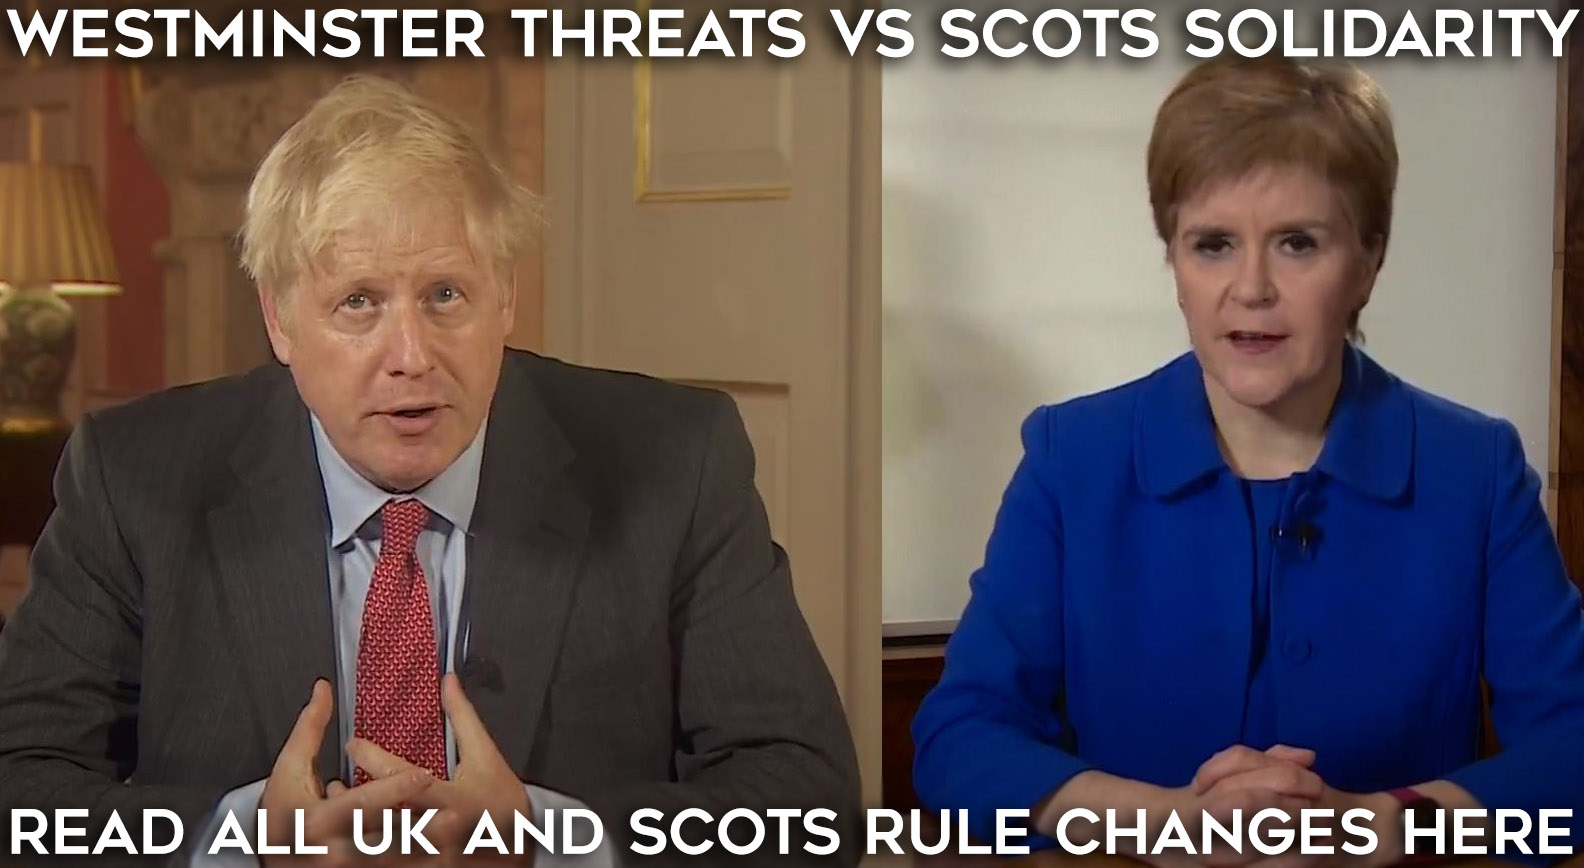 westminster threats vs scots solidarity - read all english and scots covid19 rule changes here